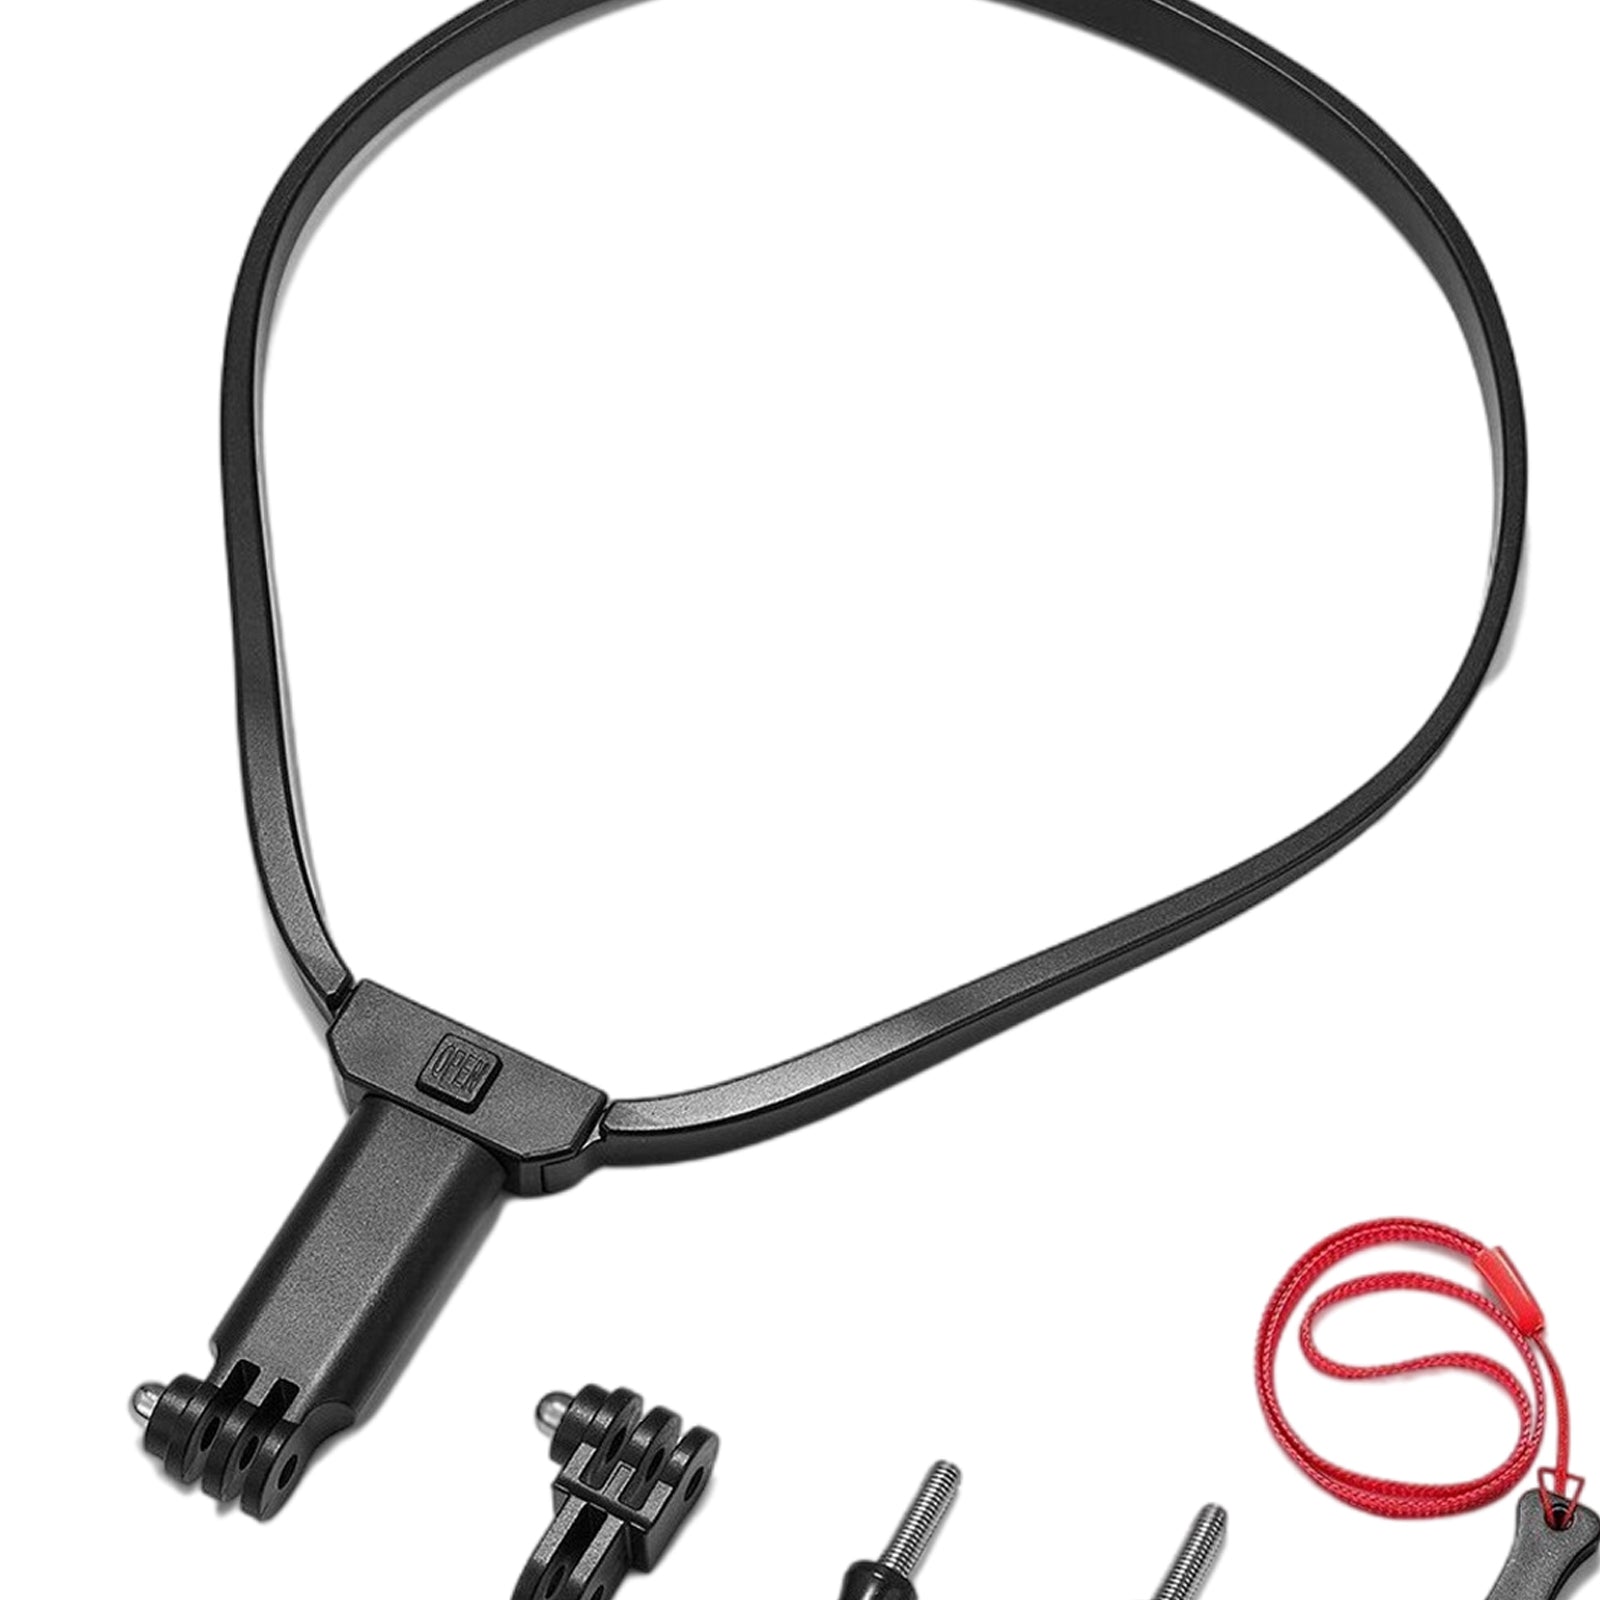 POV/Vlog Neck Holder Mount Head Strap for GoPro Comfortable with adapter